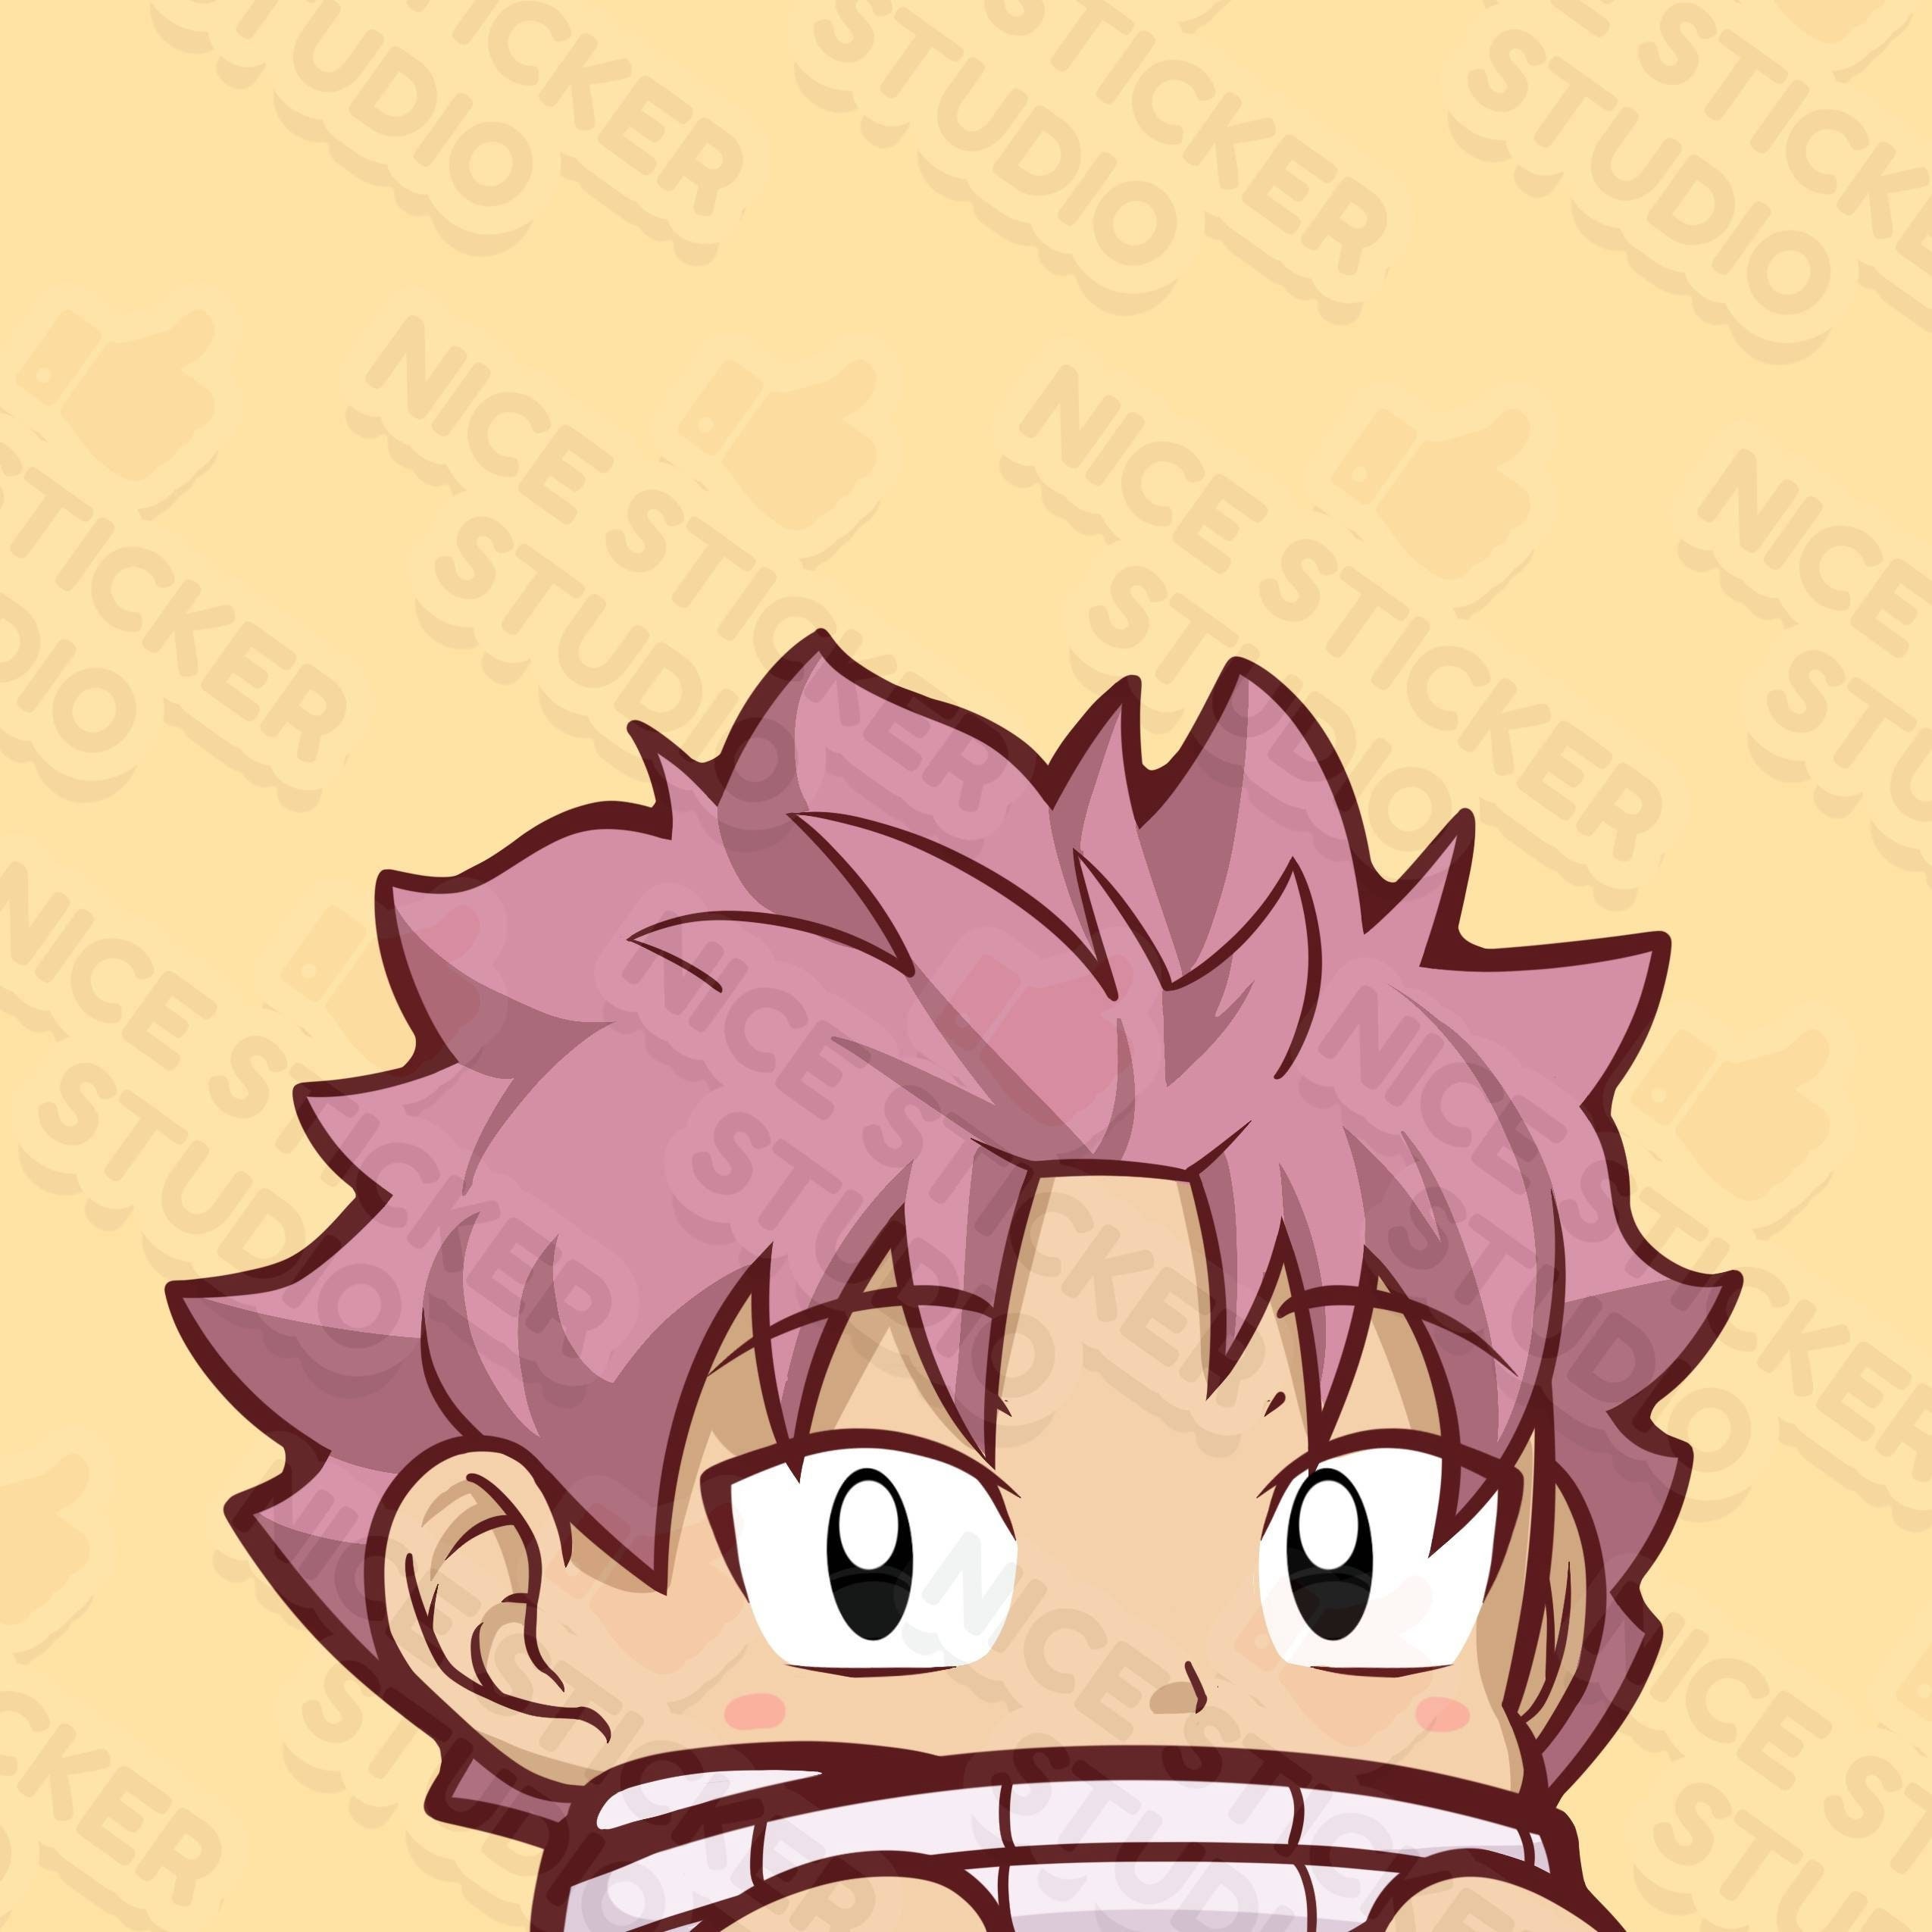 Fairy Tail Anime Stickers - Set of 25